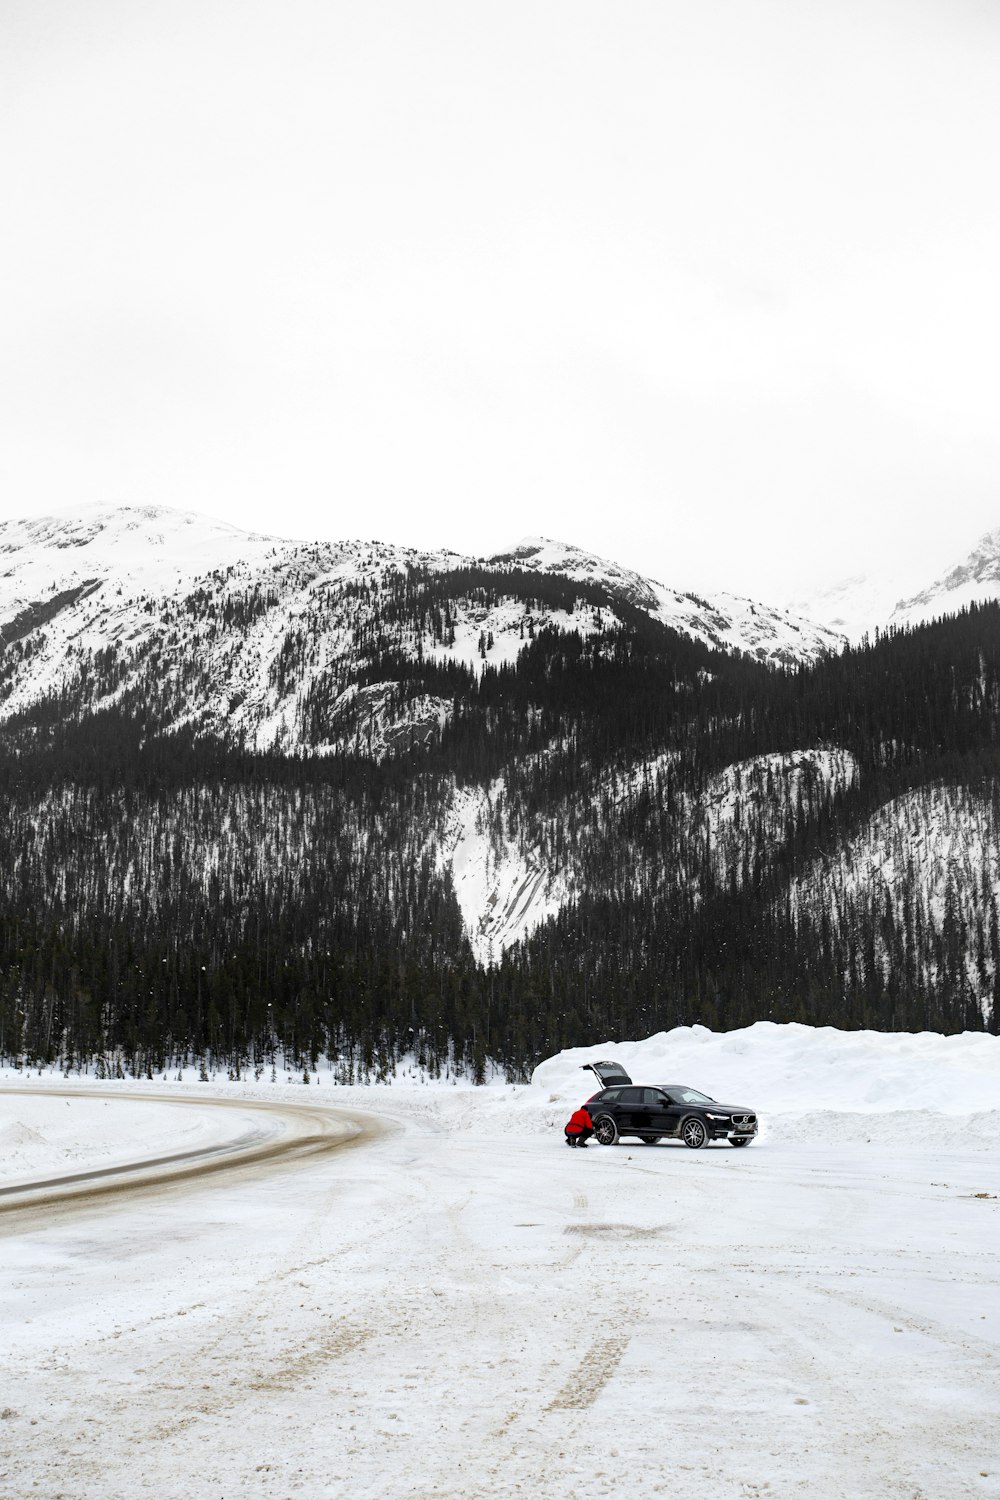 black and red sports car on snow covered road near snow covered mountain during daytime